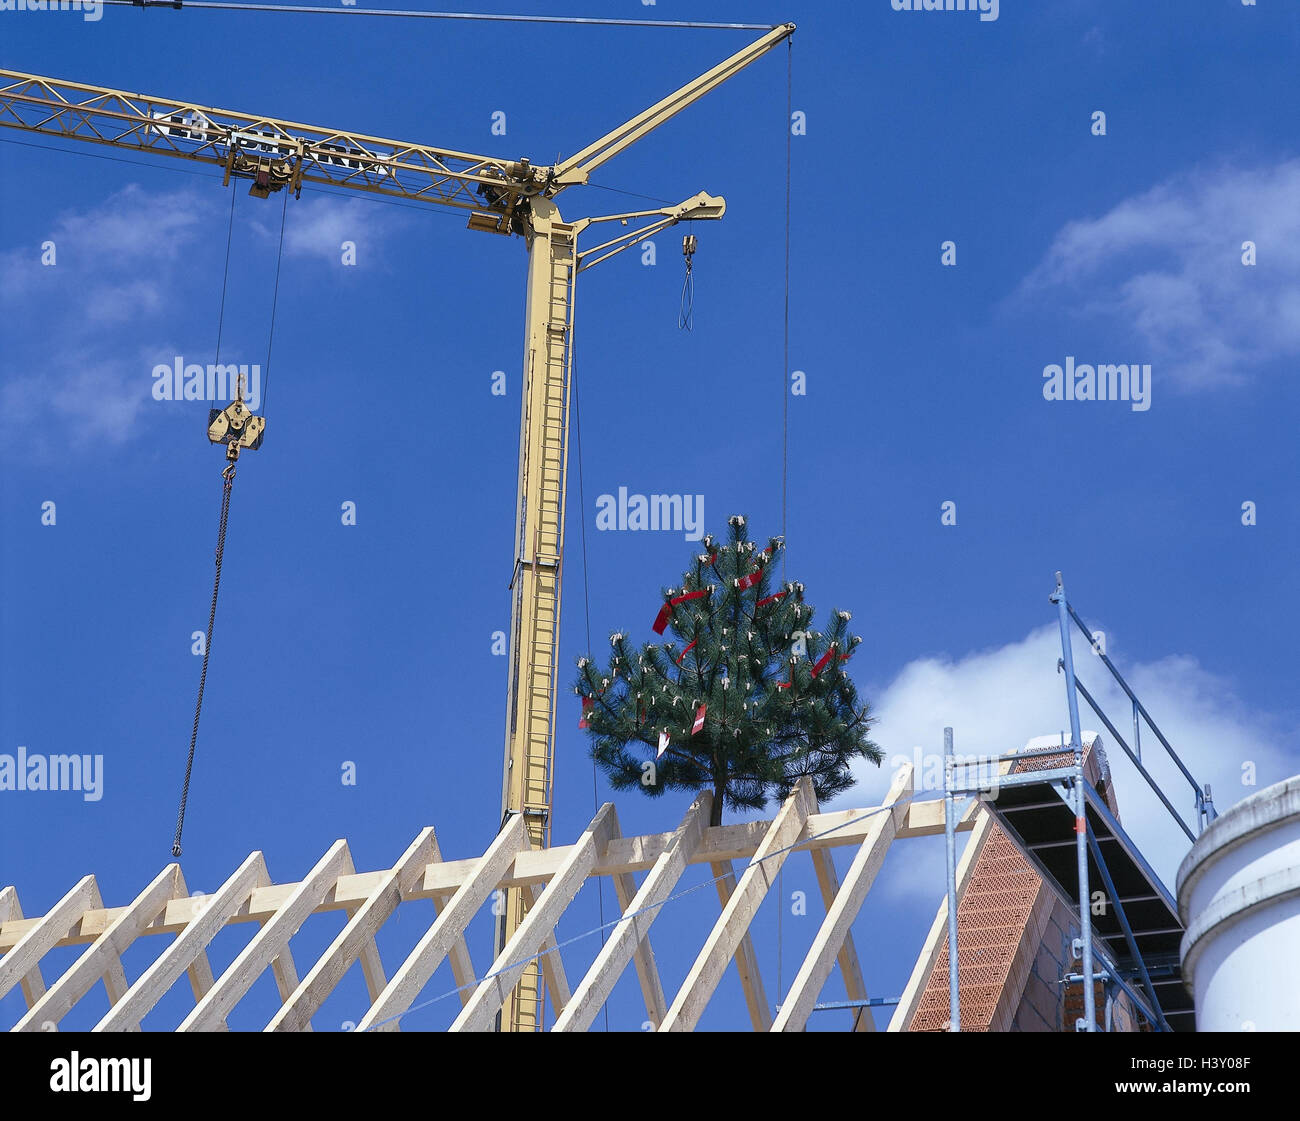 Germany, shell, clay brick house, detail, roof truss, topping-out ceremony, Richtbaum, crane building of a house, build, house, residential house, own home, new building, brick building, Richtbäumchen, roof ridge, construction crane, outside Stock Photo